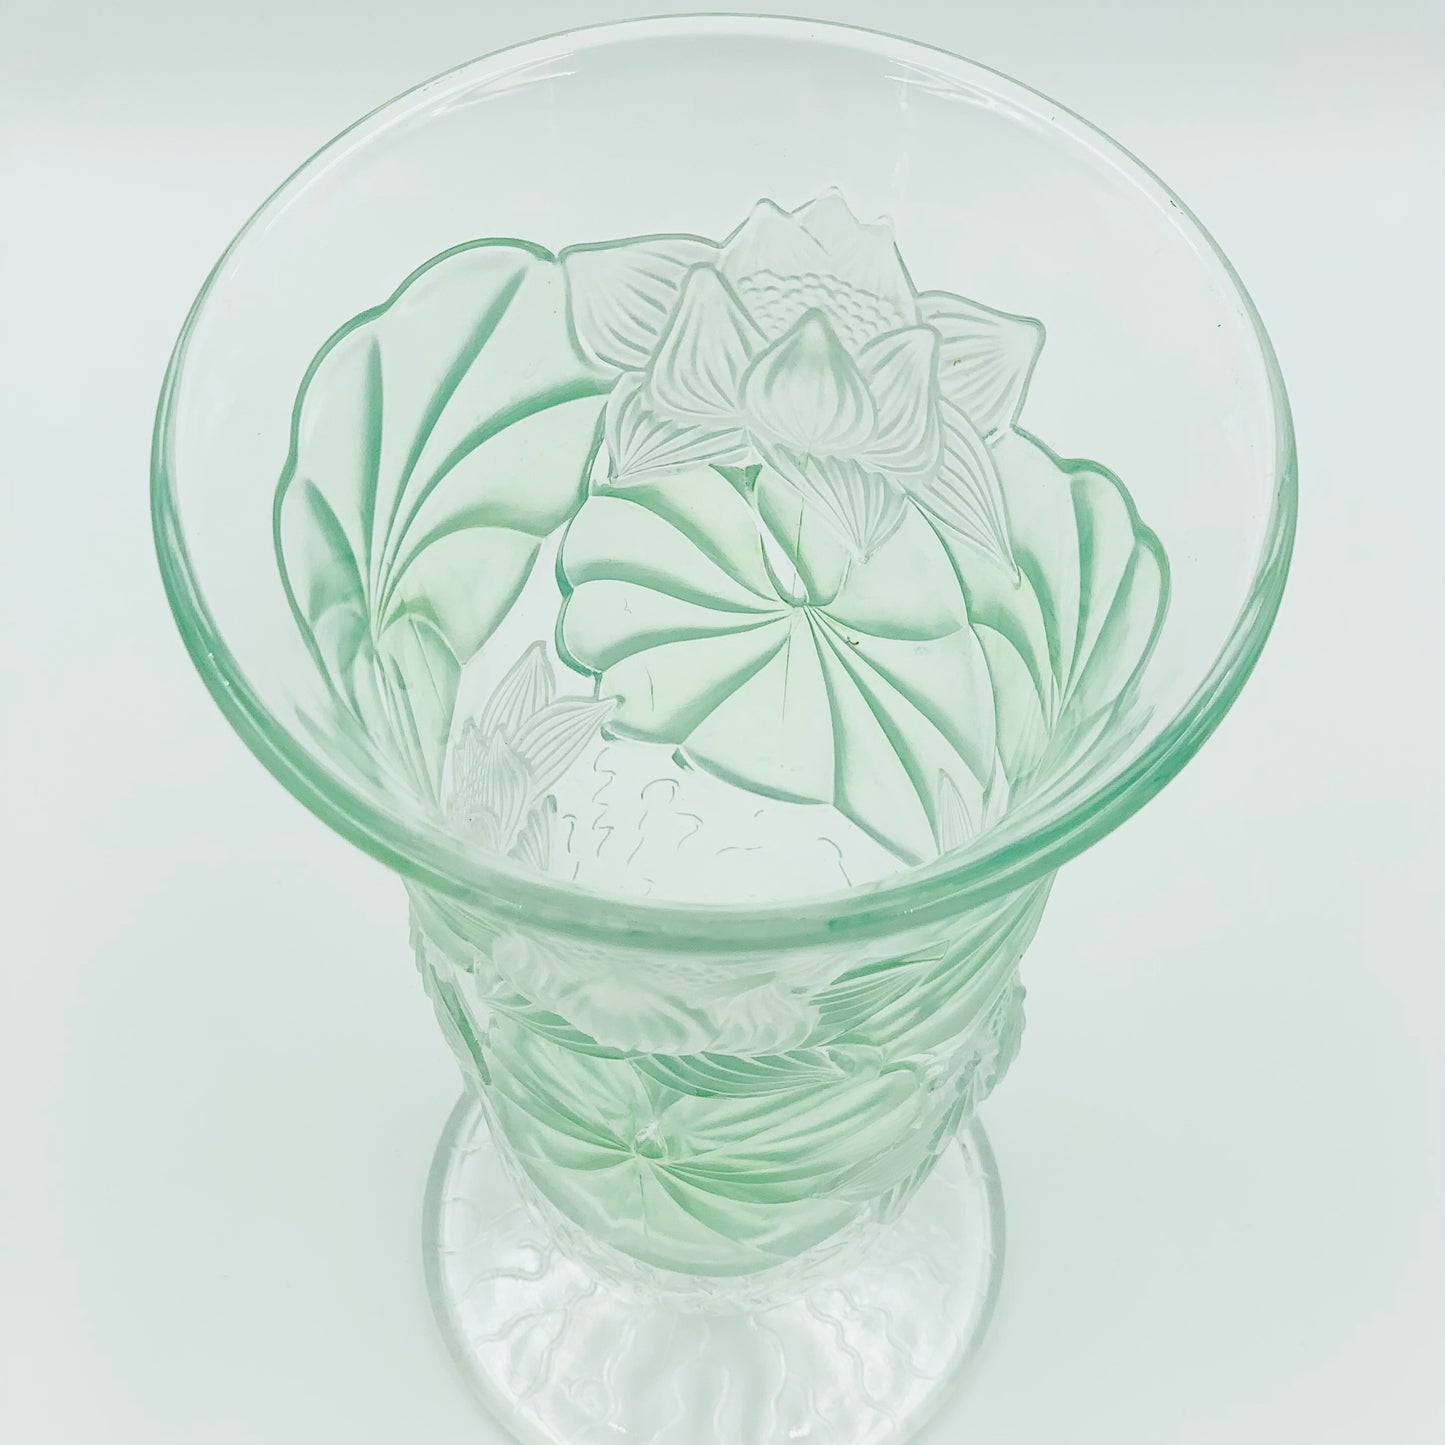 Antique Depression glass footed vase with green floral motif